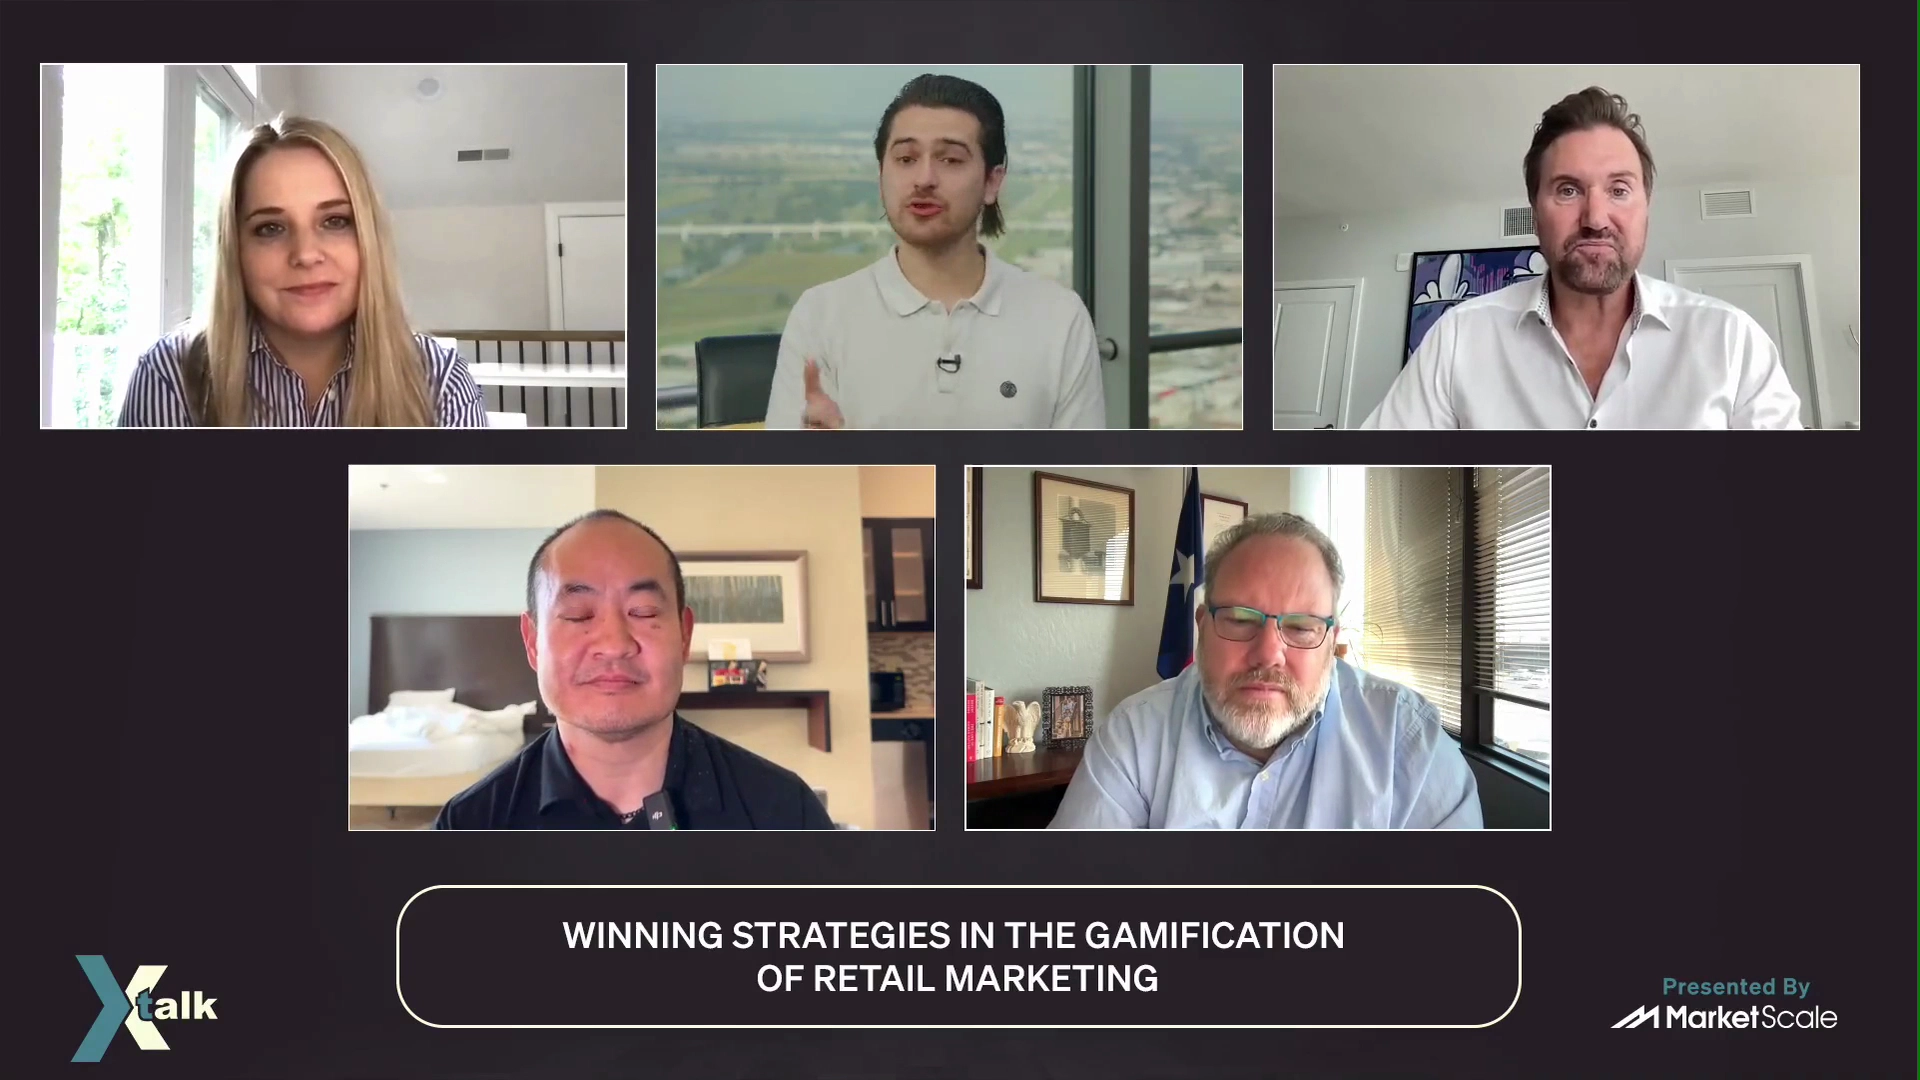 Enhancing Retailers’ Personalization with Gamification